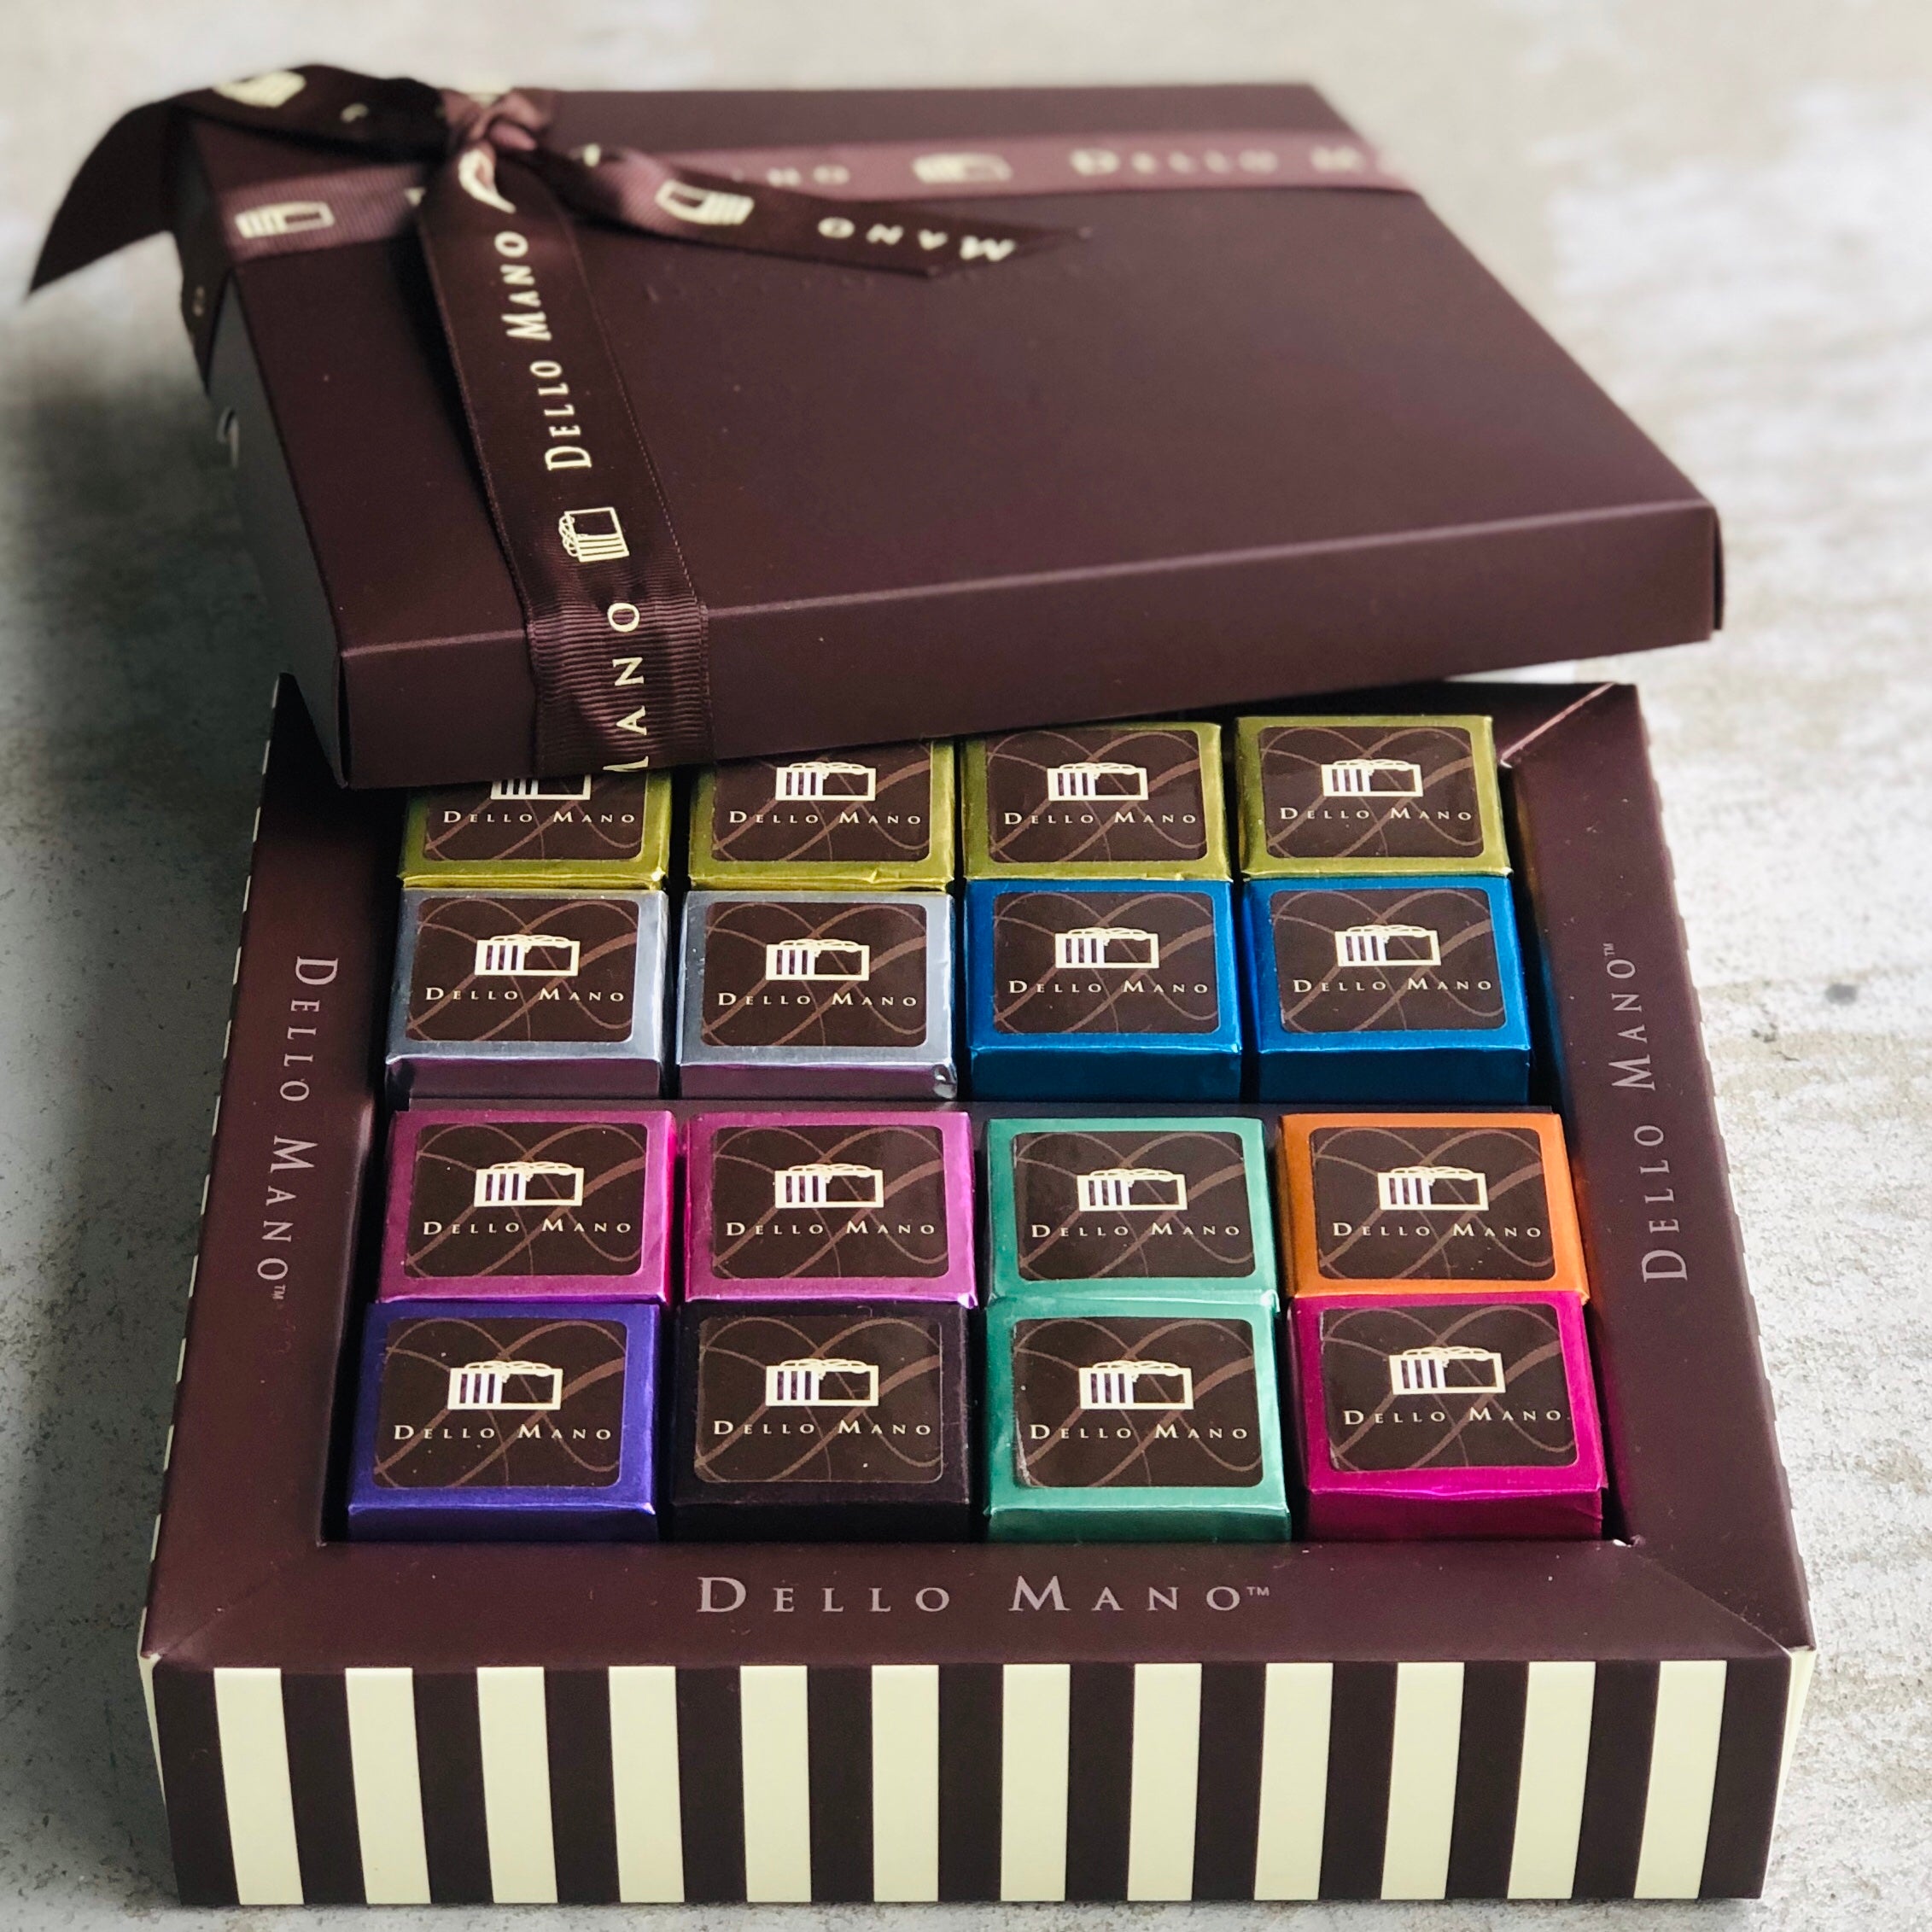 A mixed box of brownies with colourful foils. The chocolate gift box has the lid open and a ribbon that has words saying Dello Mano